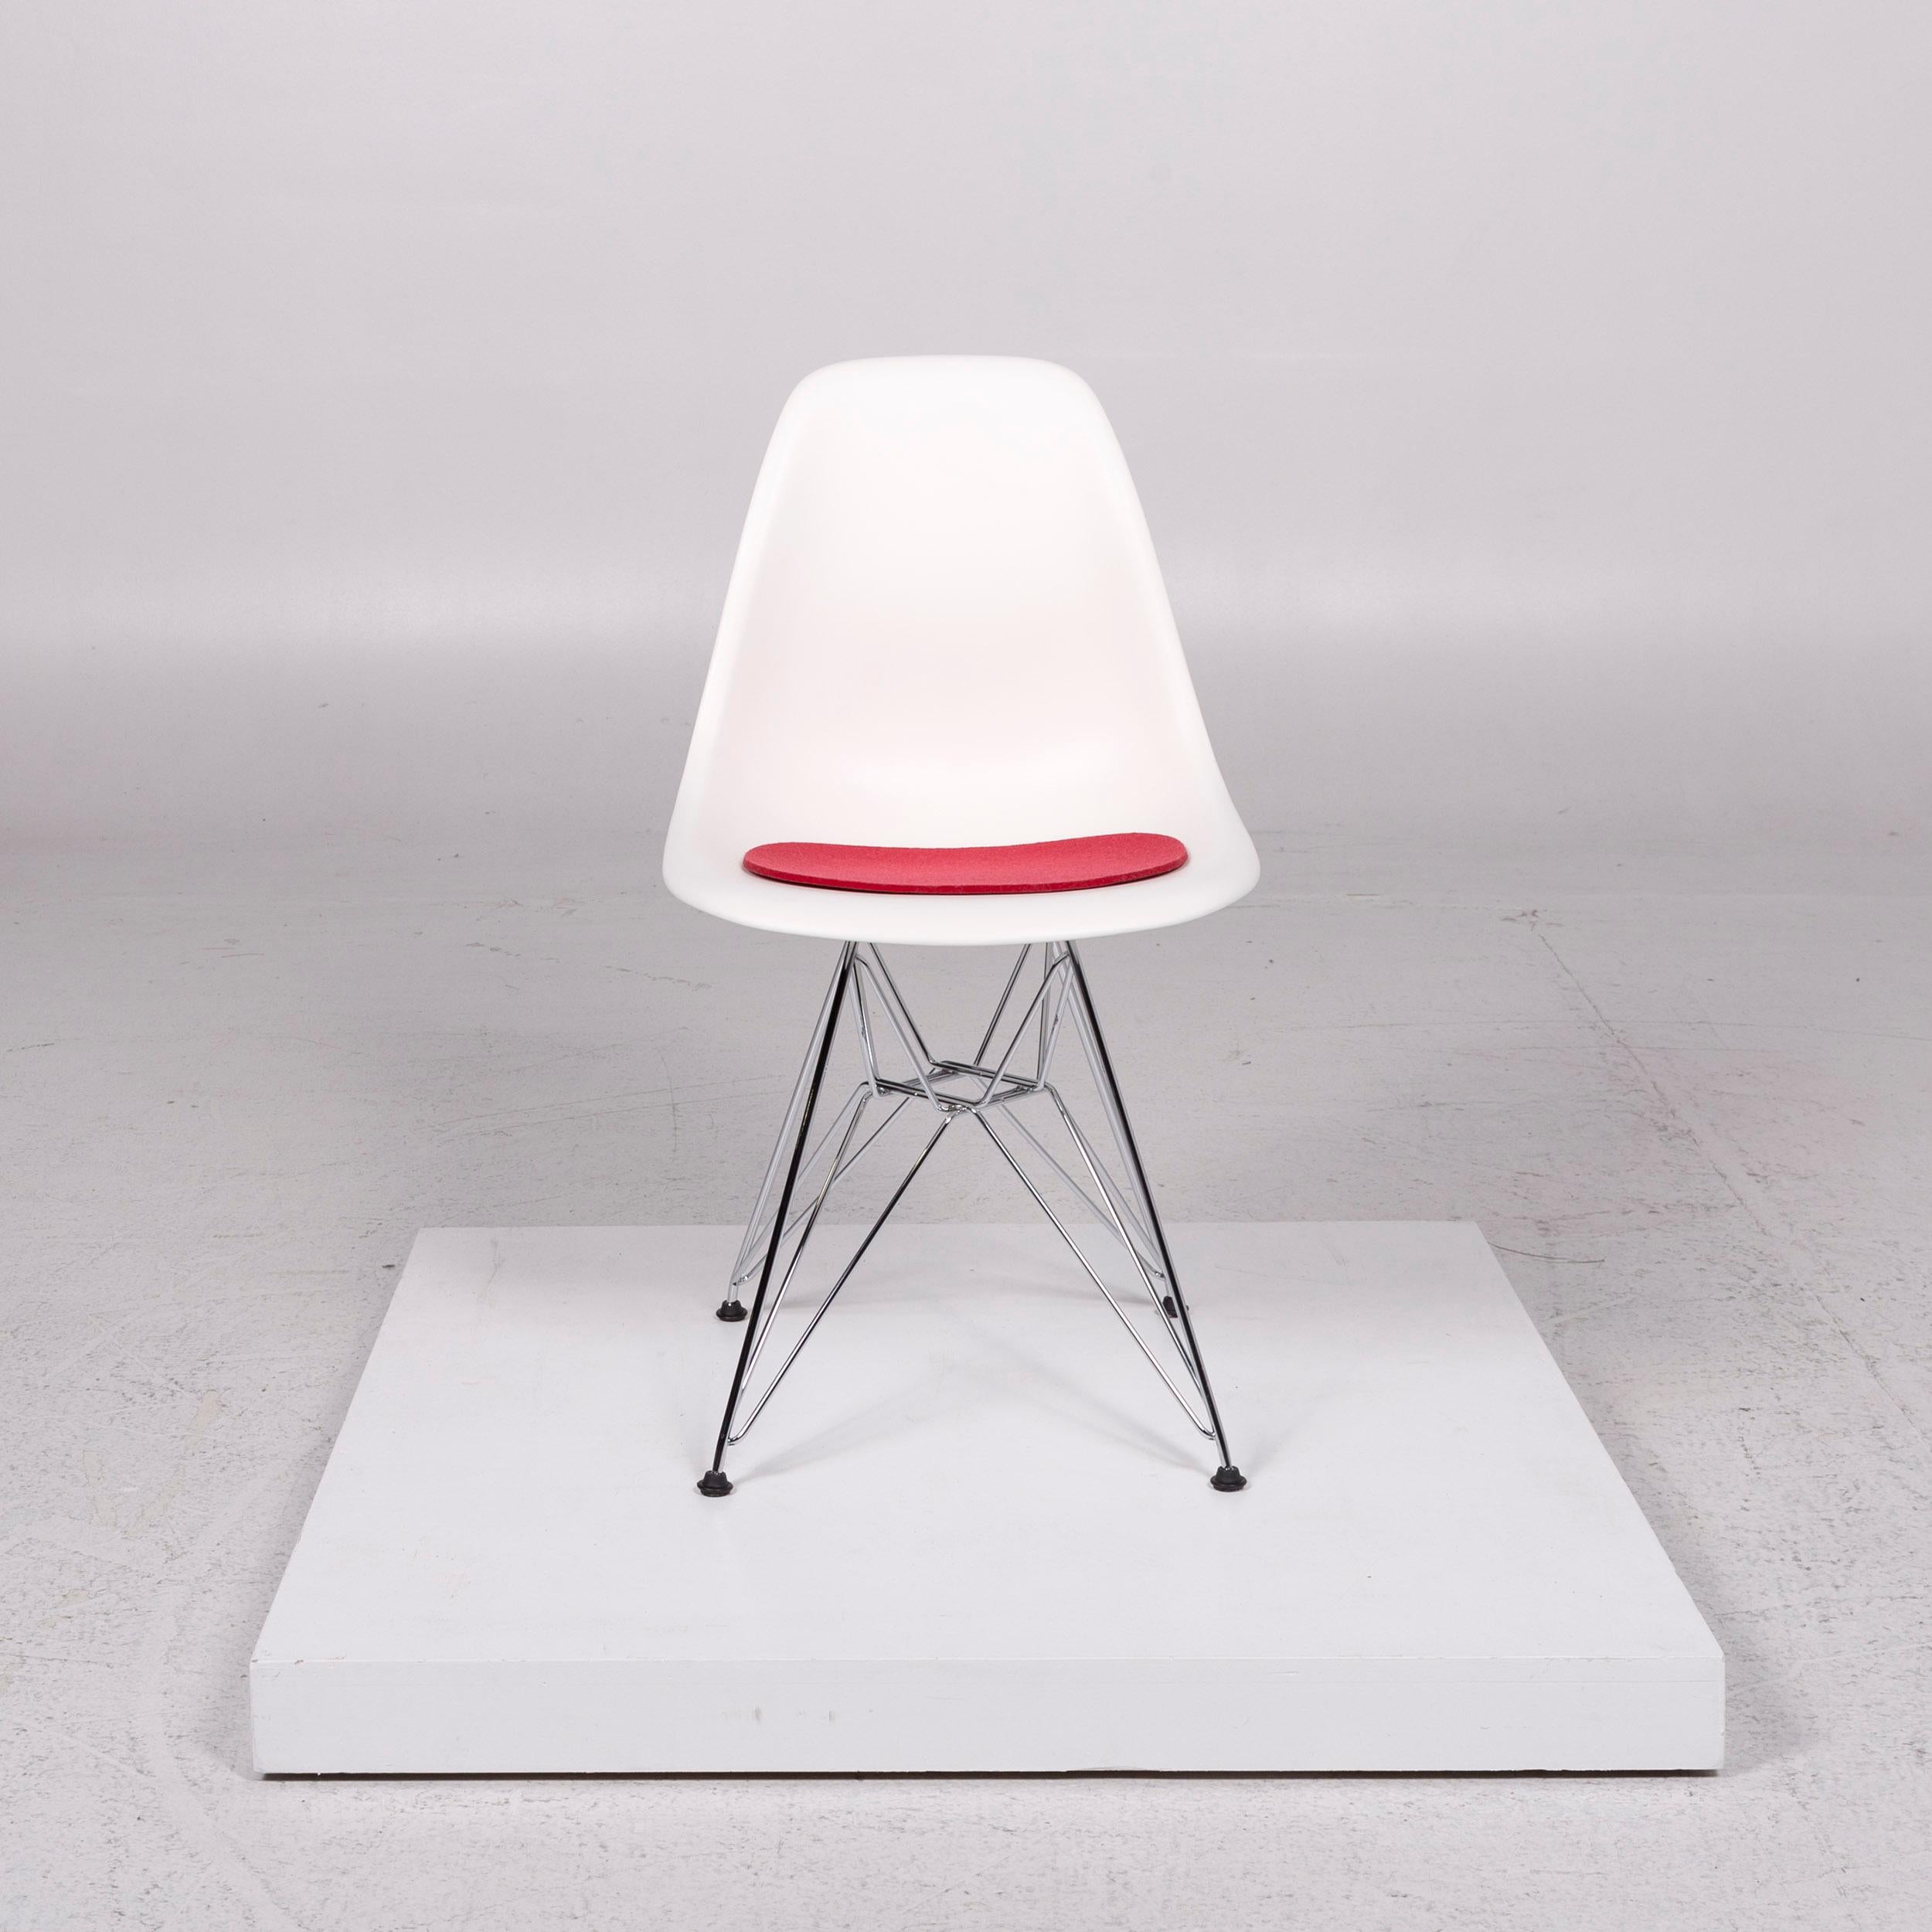 German Vitra Eames Plastic Side Chair DSR White Plastic Chair White incl. Upholstery